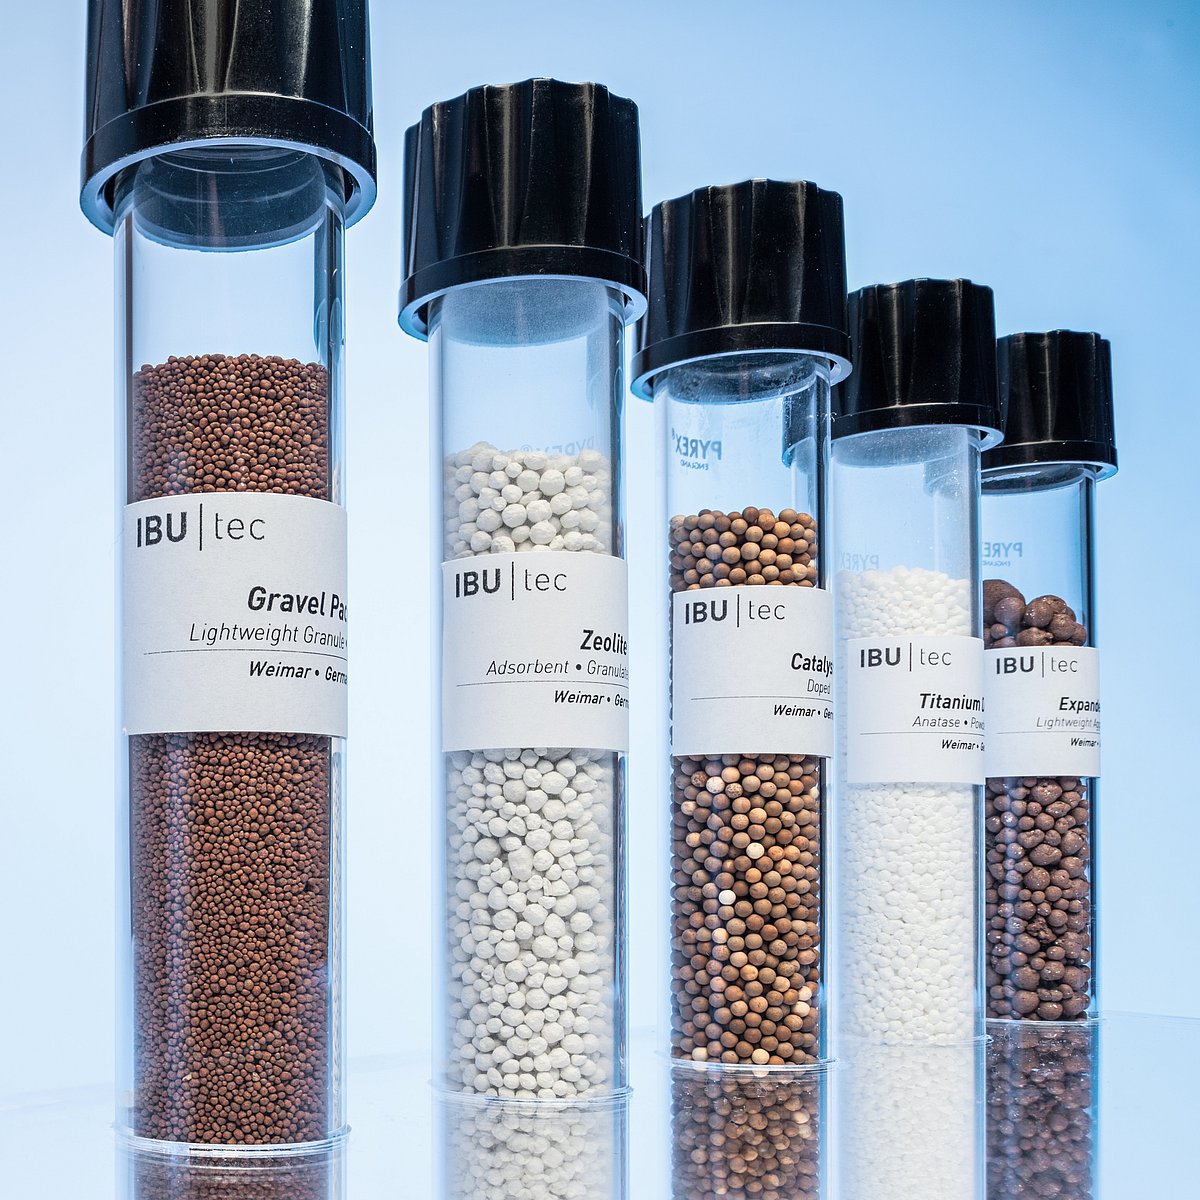 IBU-tec test tube with several material samples showcasing our capability for tolling services for powders and granules